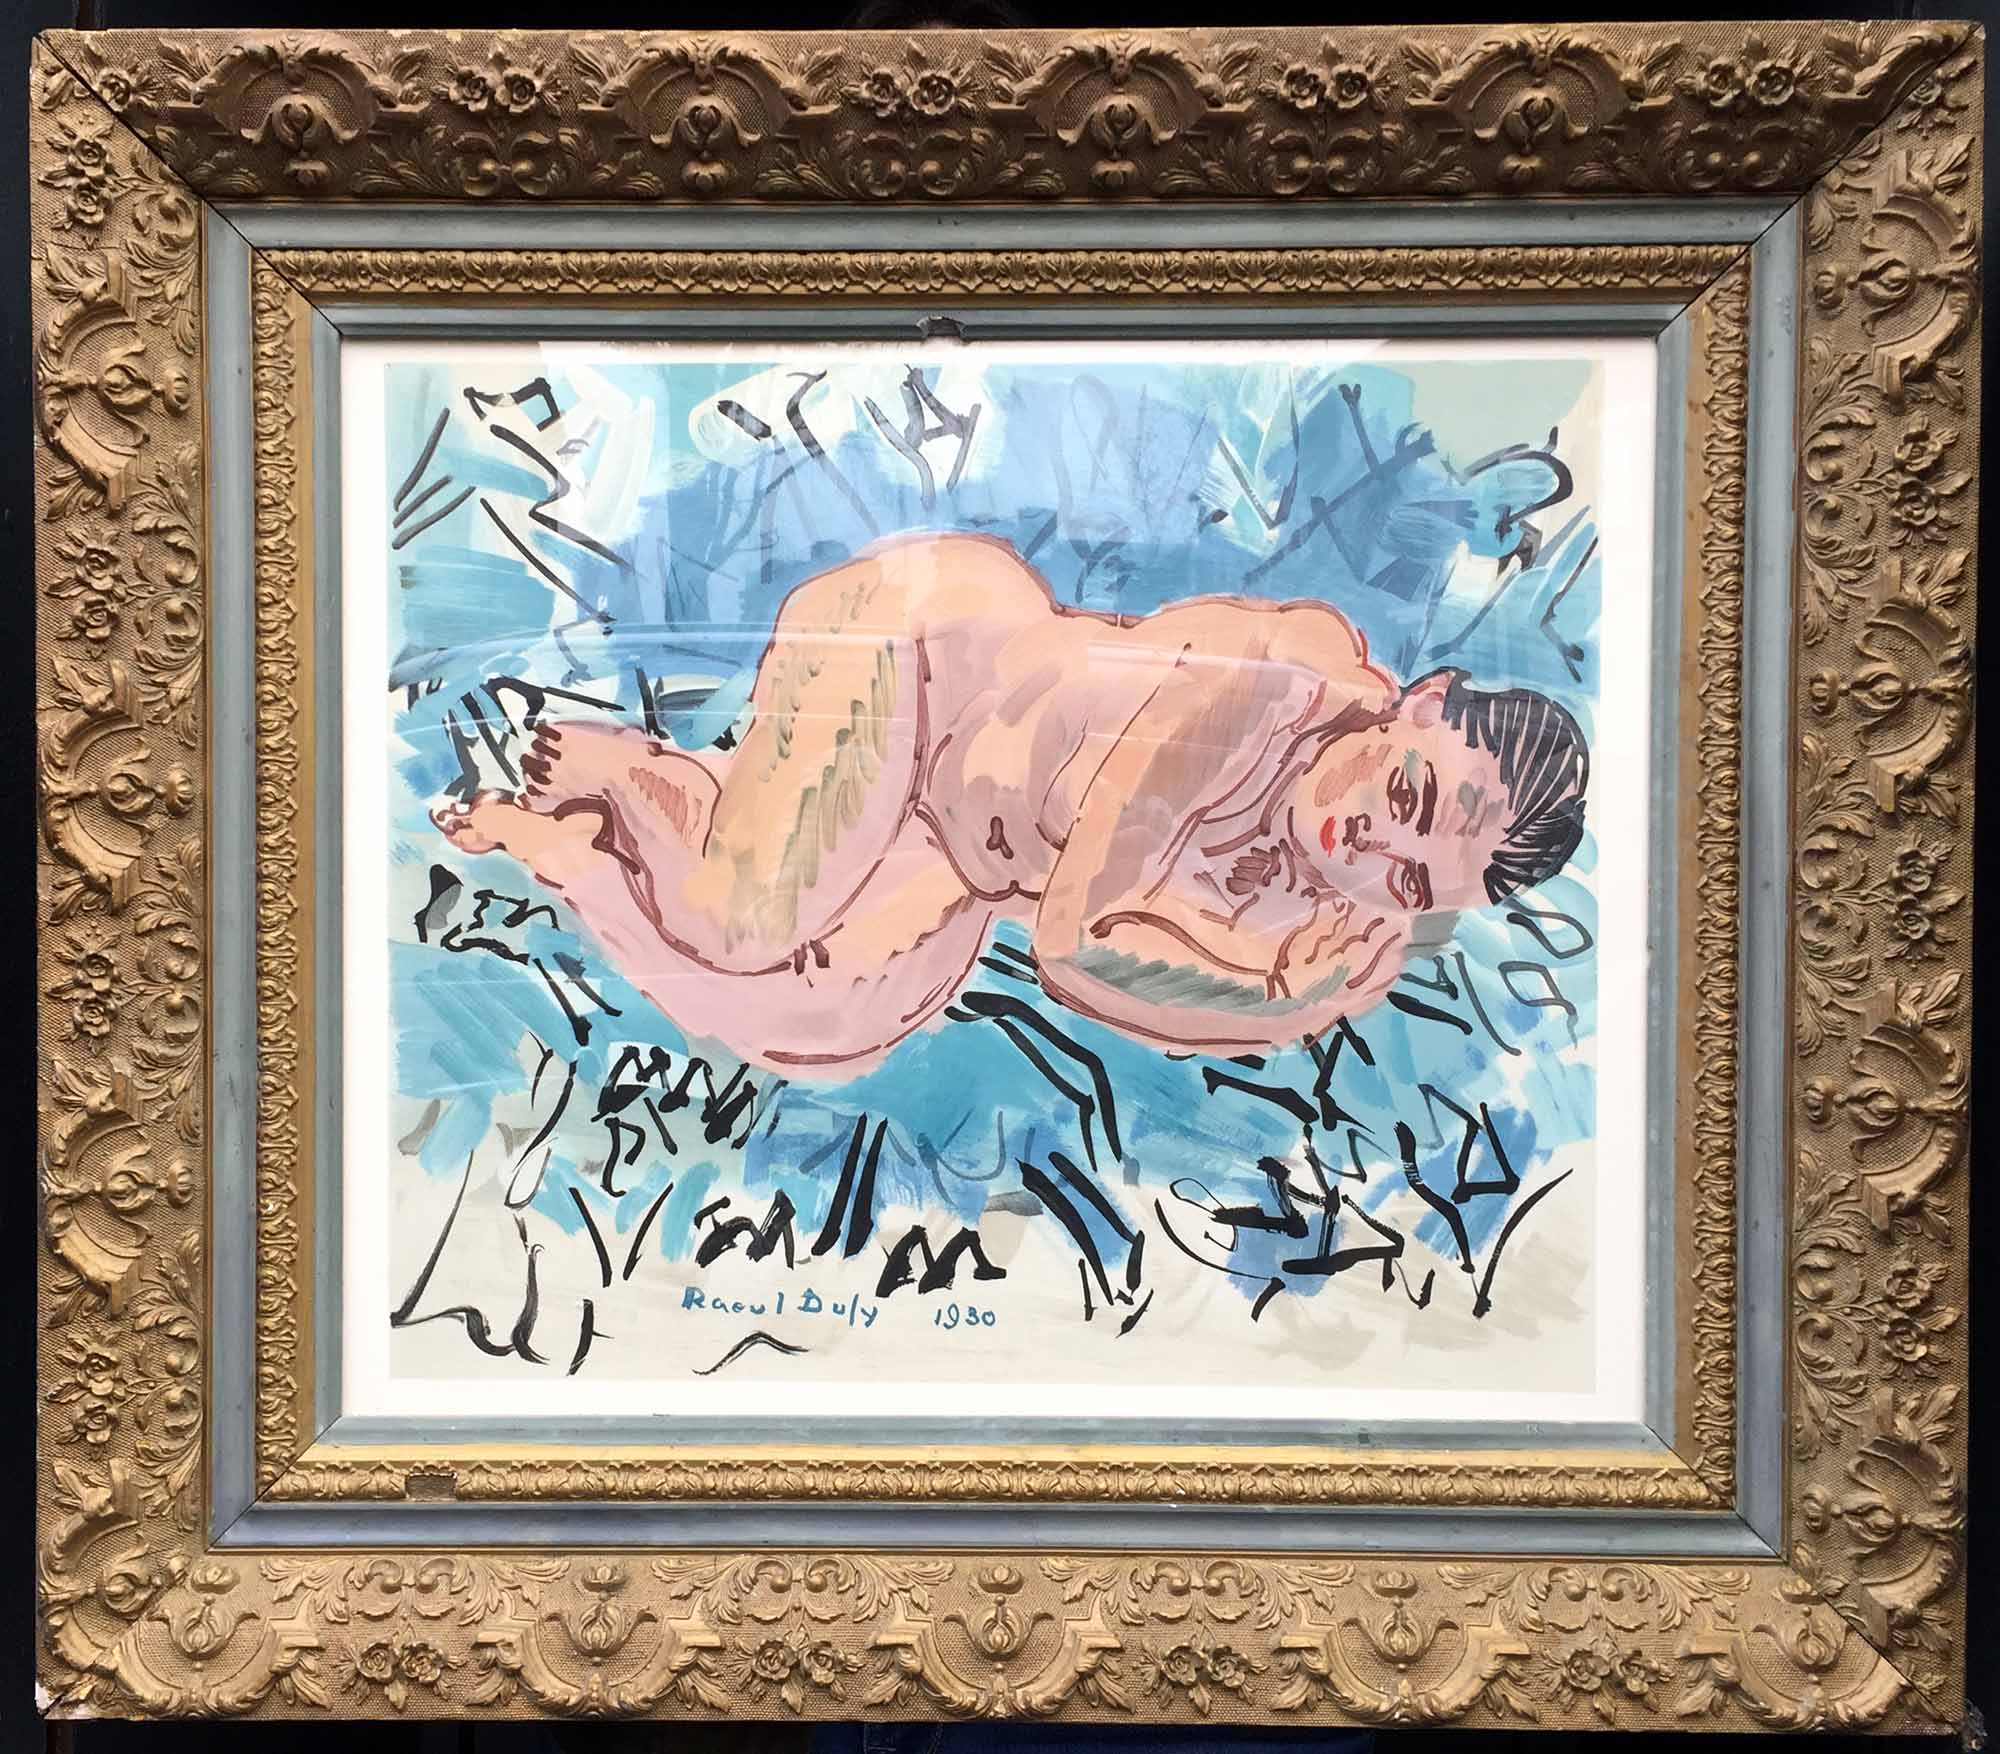 RAOUL DUFY 'Nude', lithograph 1969, numbered edition 1000, Pierre Levy Edition, 45cm x 53cm,